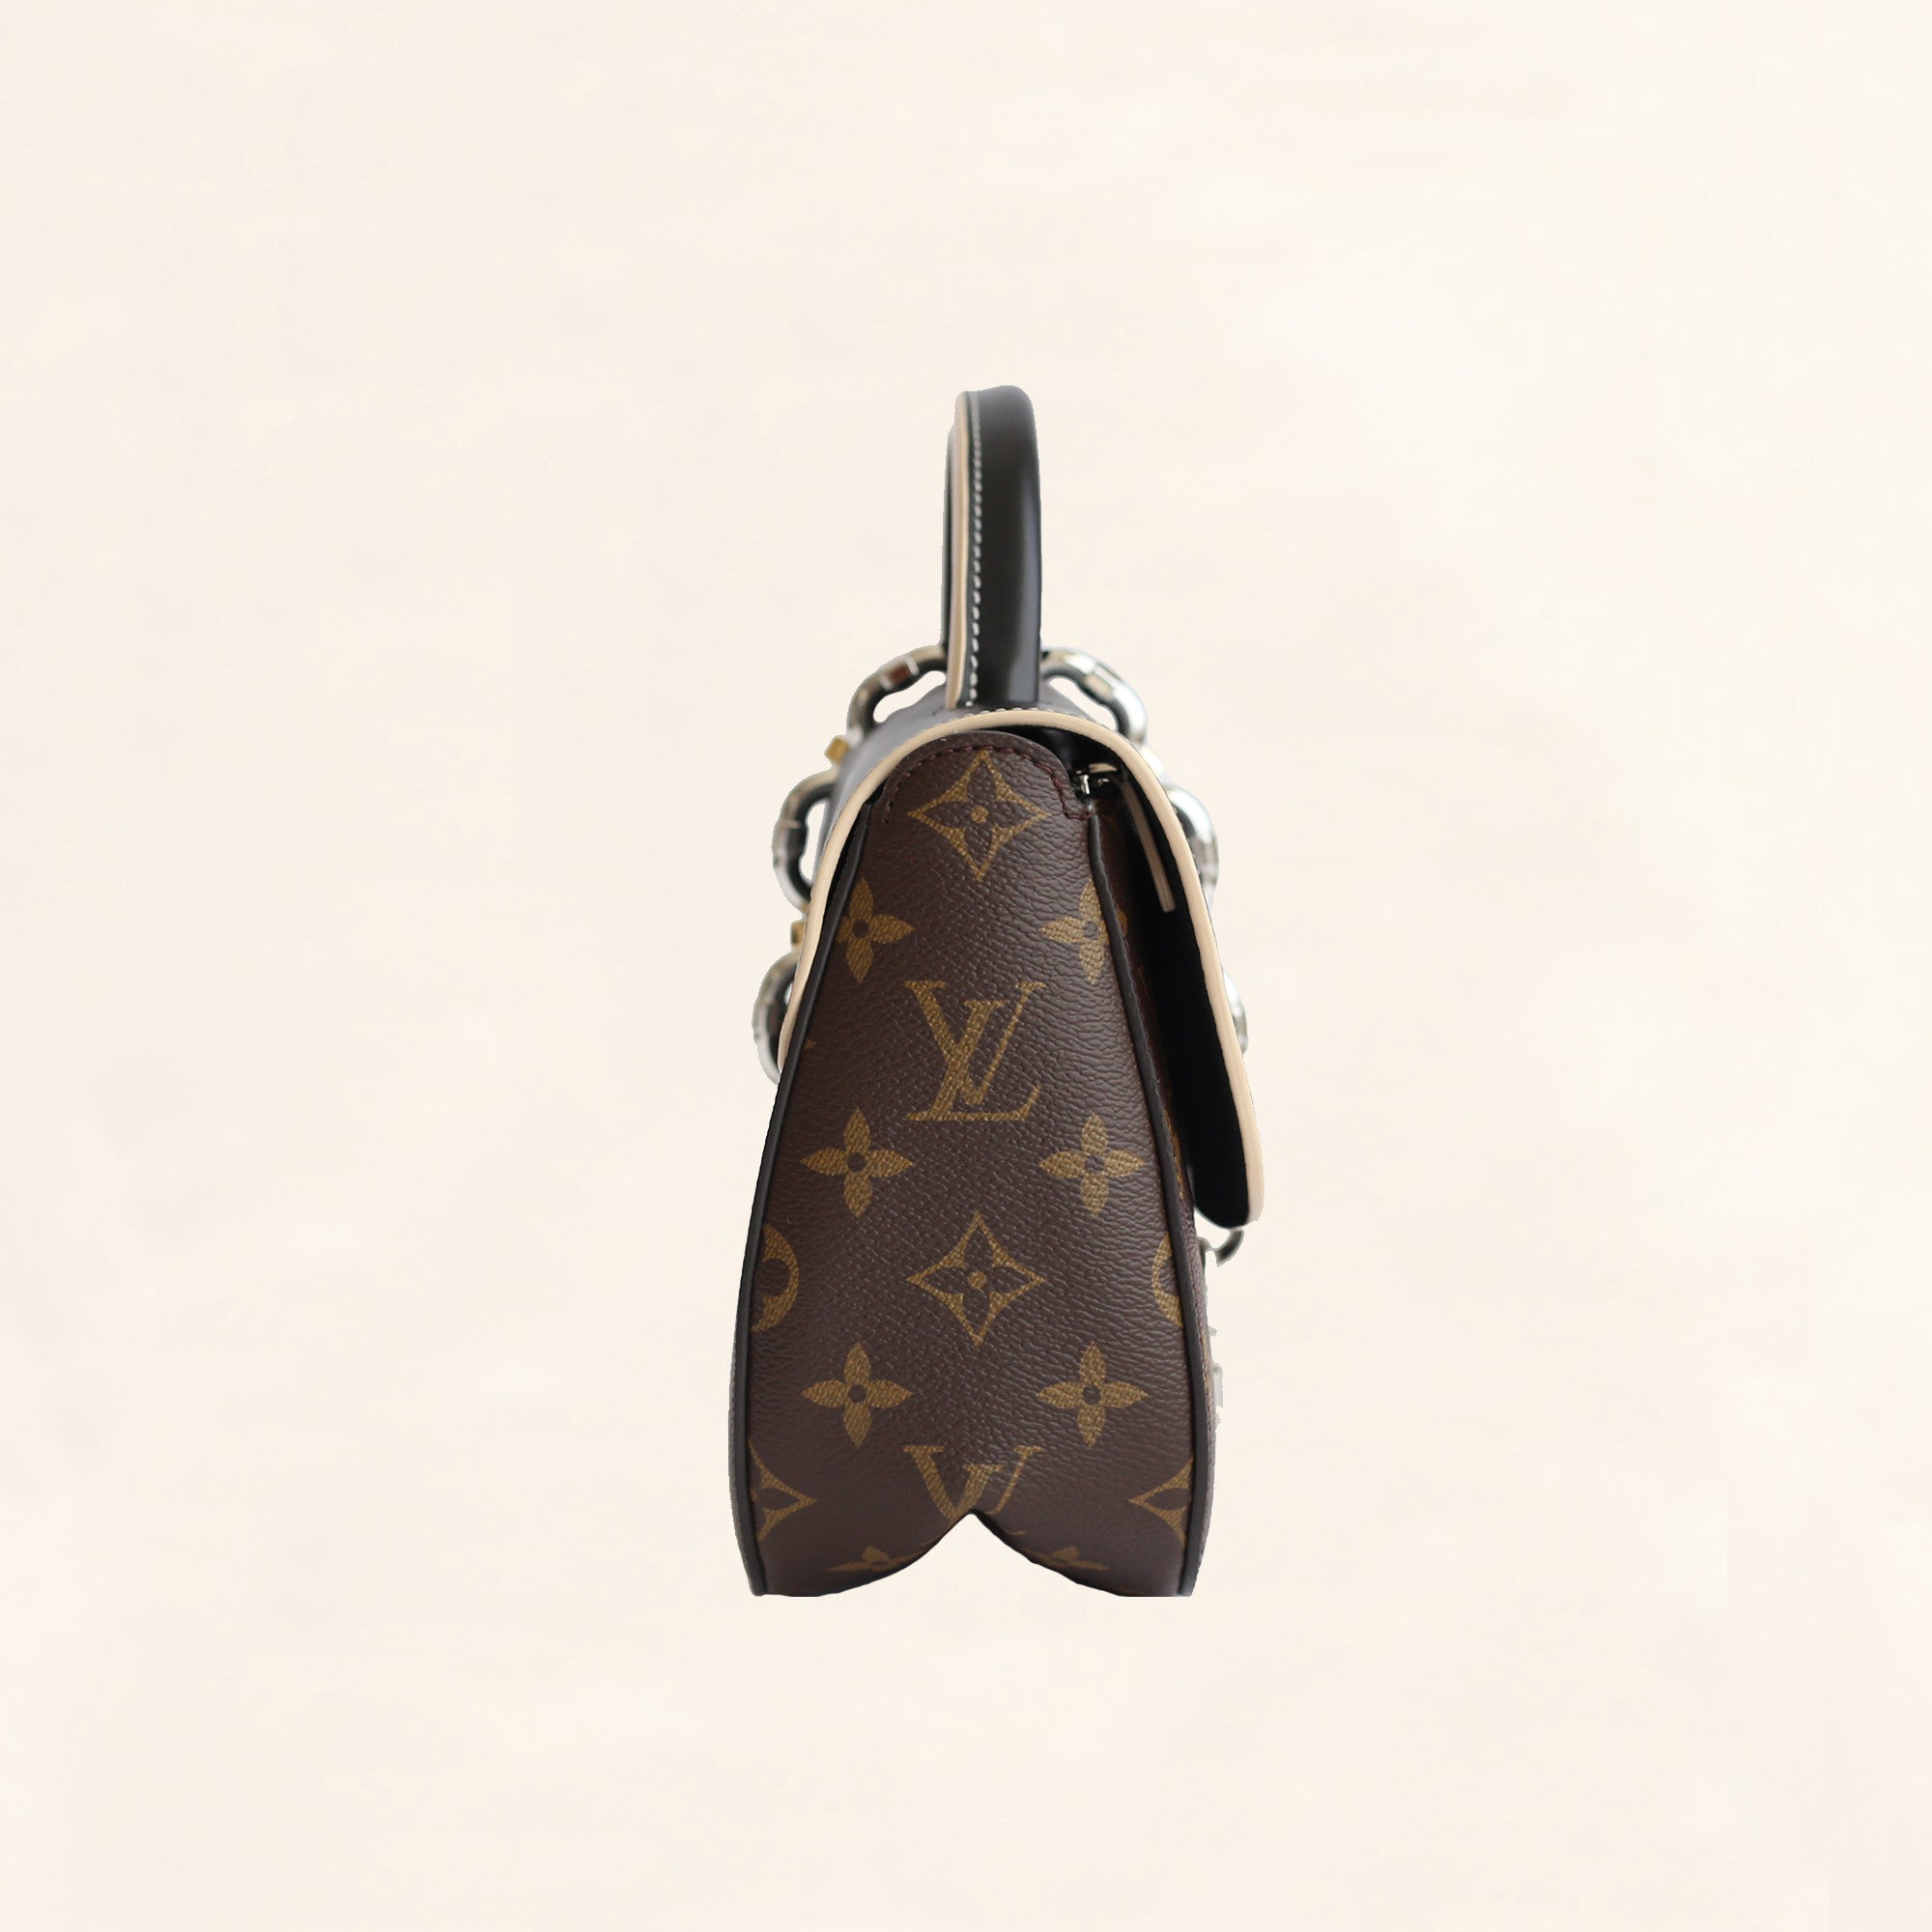 LOUIS VUITTON RUNWAY CHAIN Monogram Suitcase Travel Bag Carry On